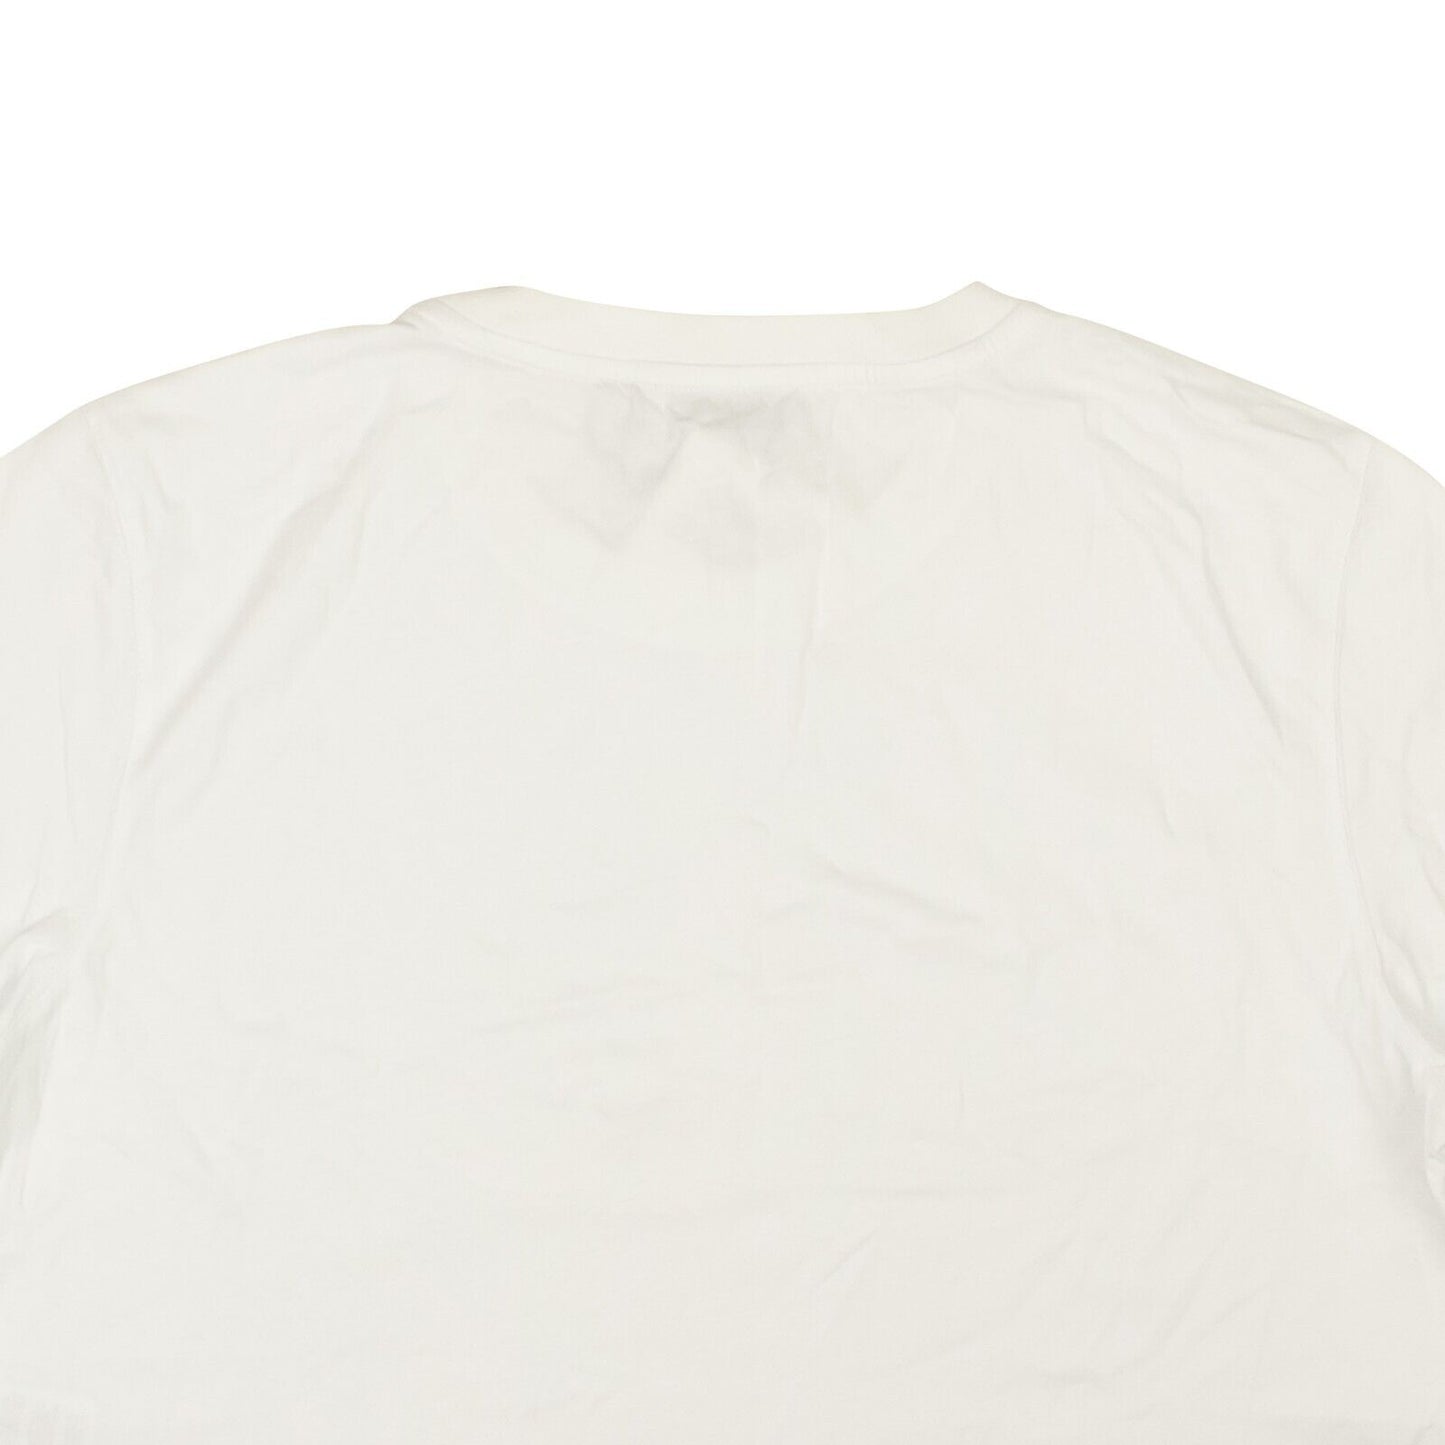 Opening Ceremony Blank Oc Cropped T-Shirt - Chalk